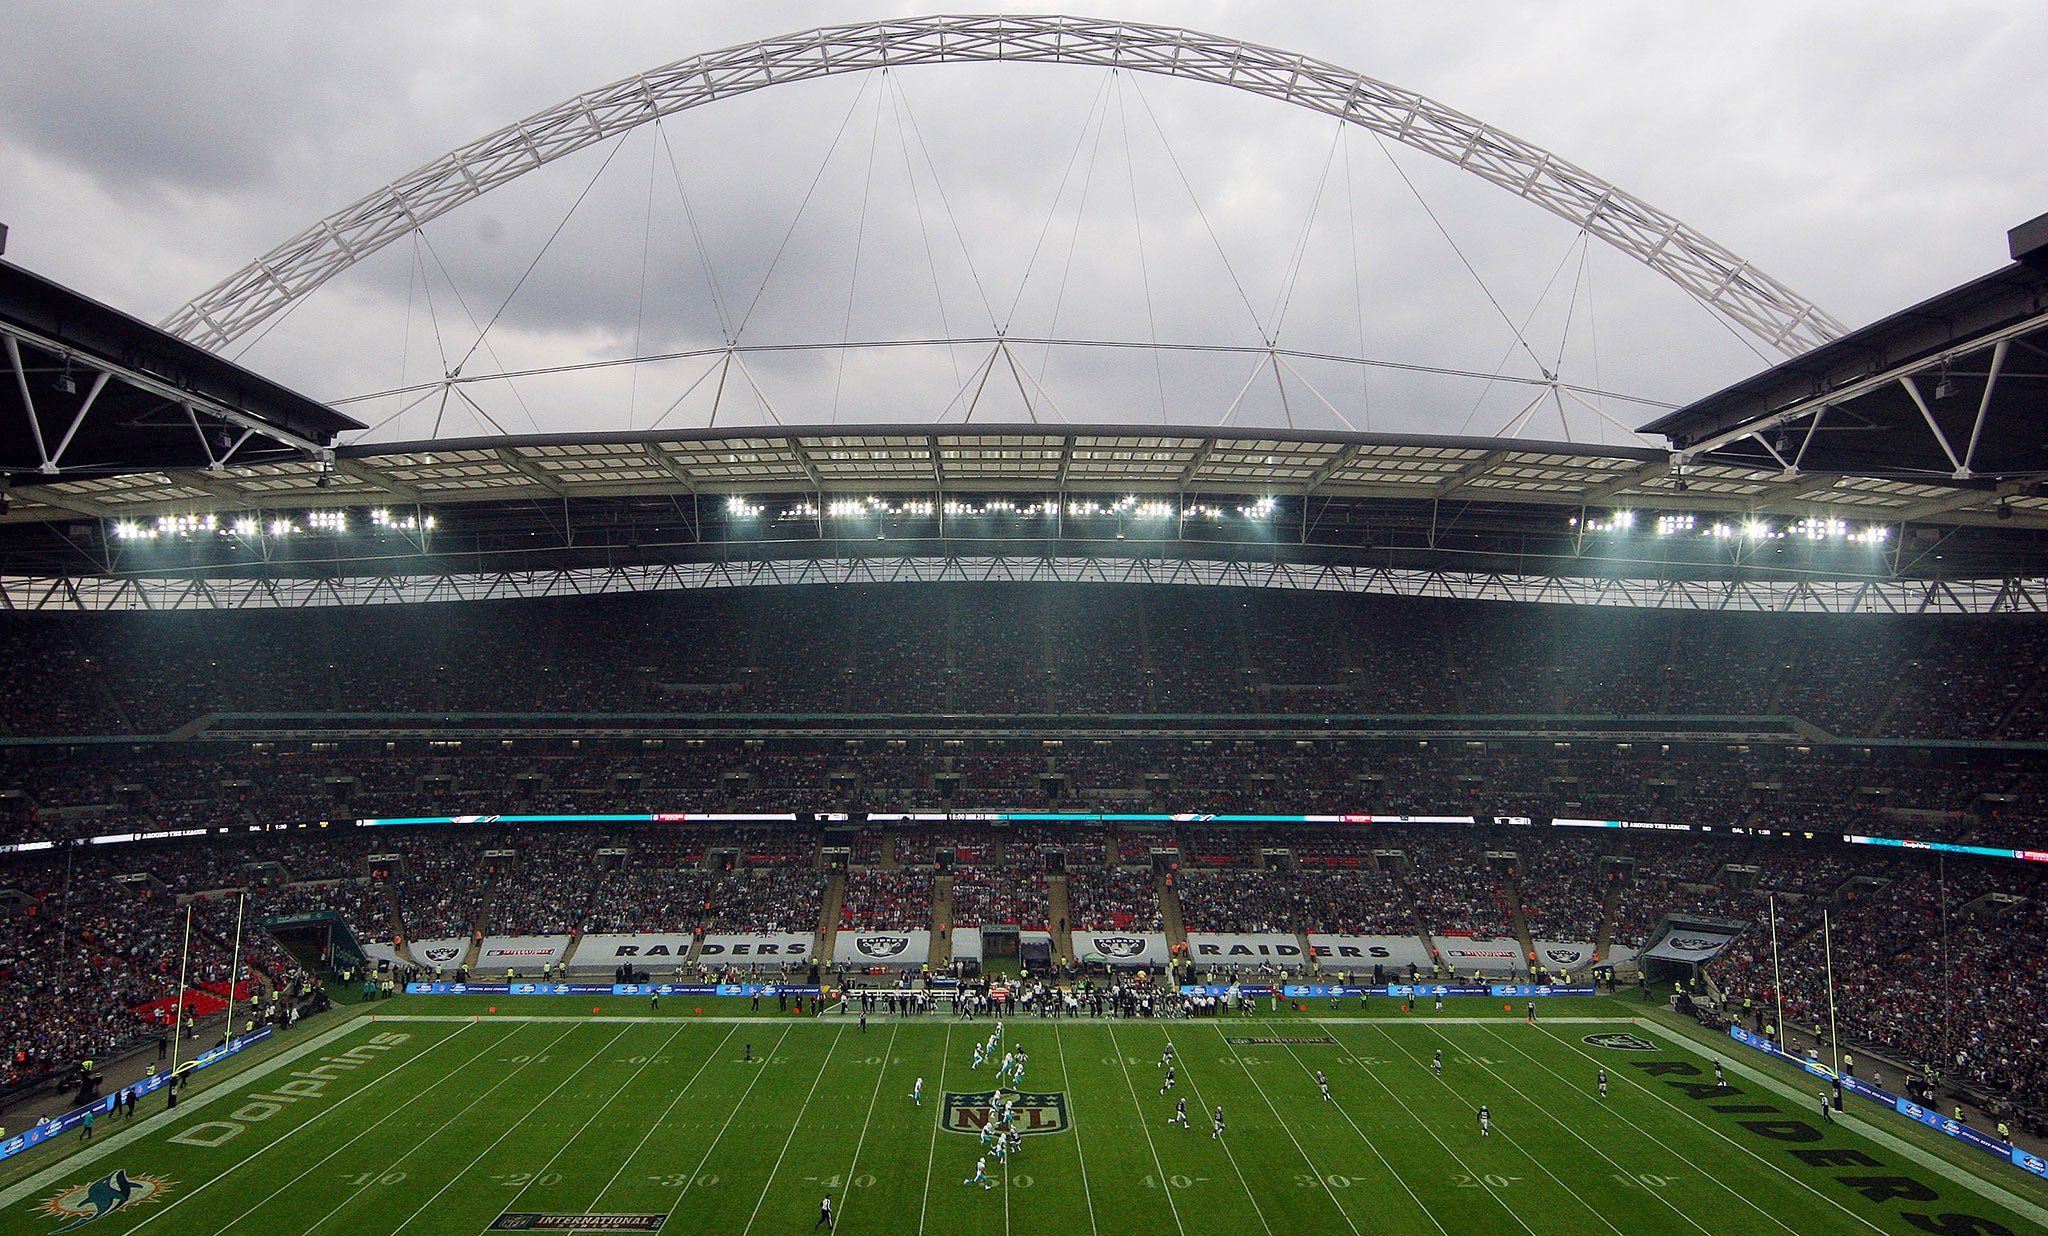 The NFL returns to Wembley for the second of three games this year